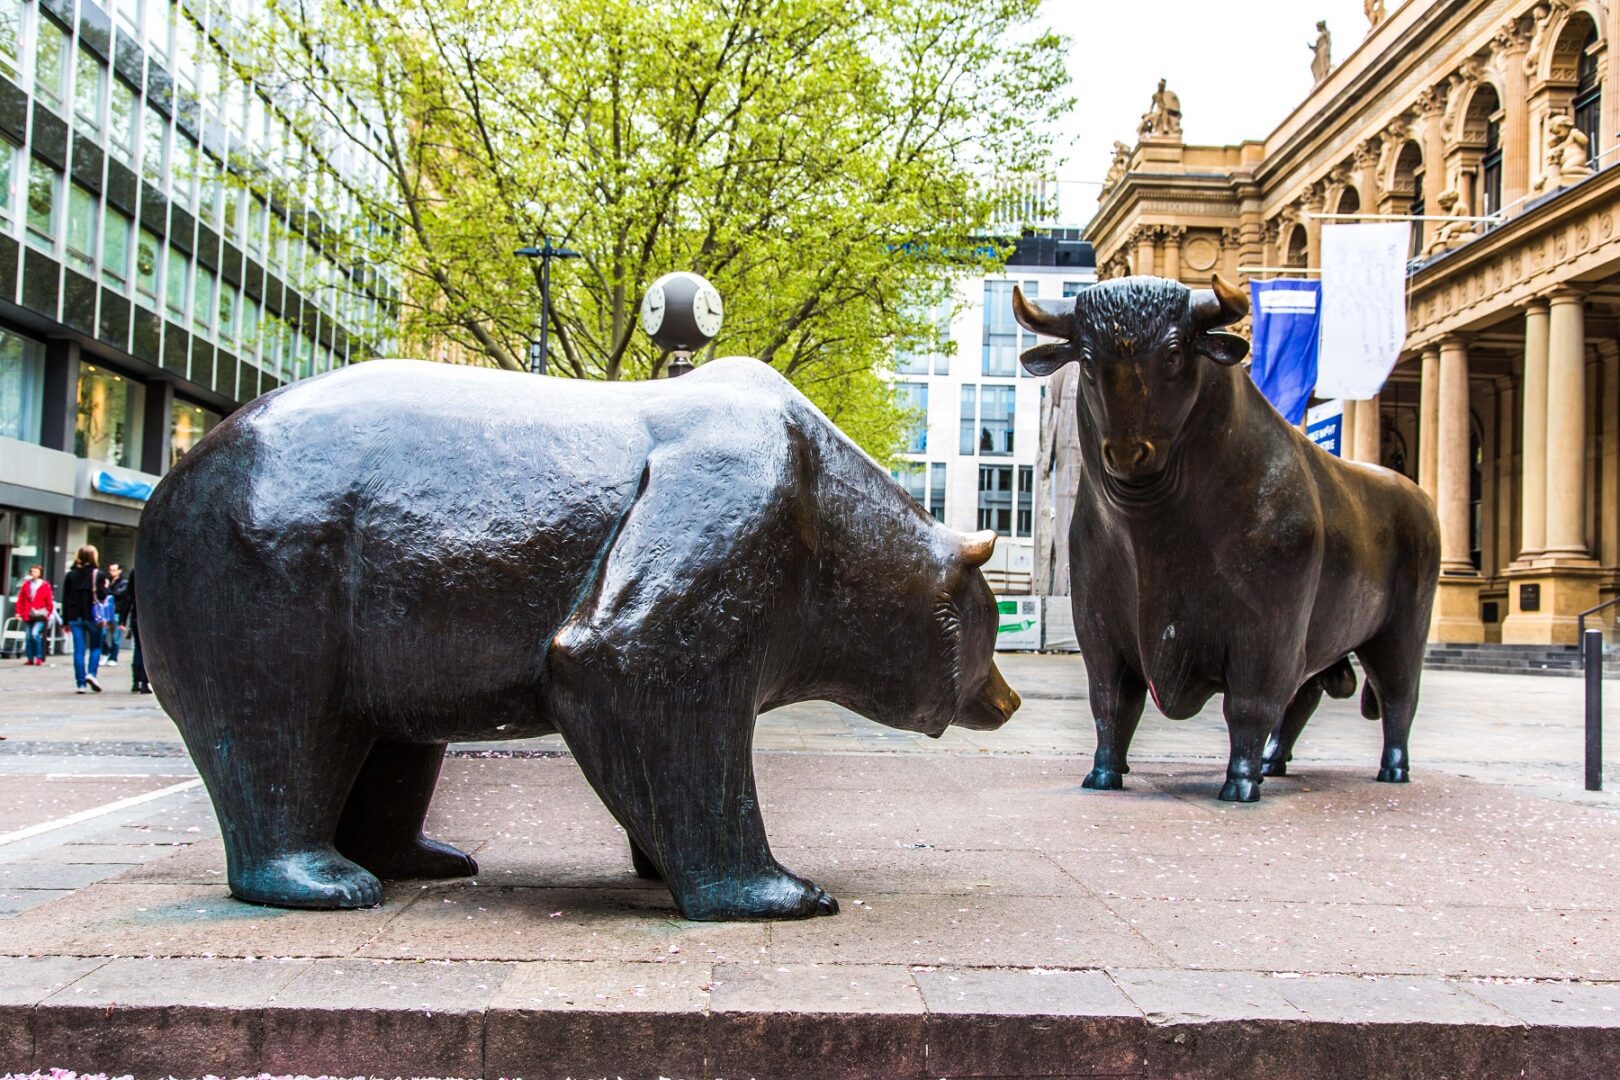 A bull and bear statue in front of a building.